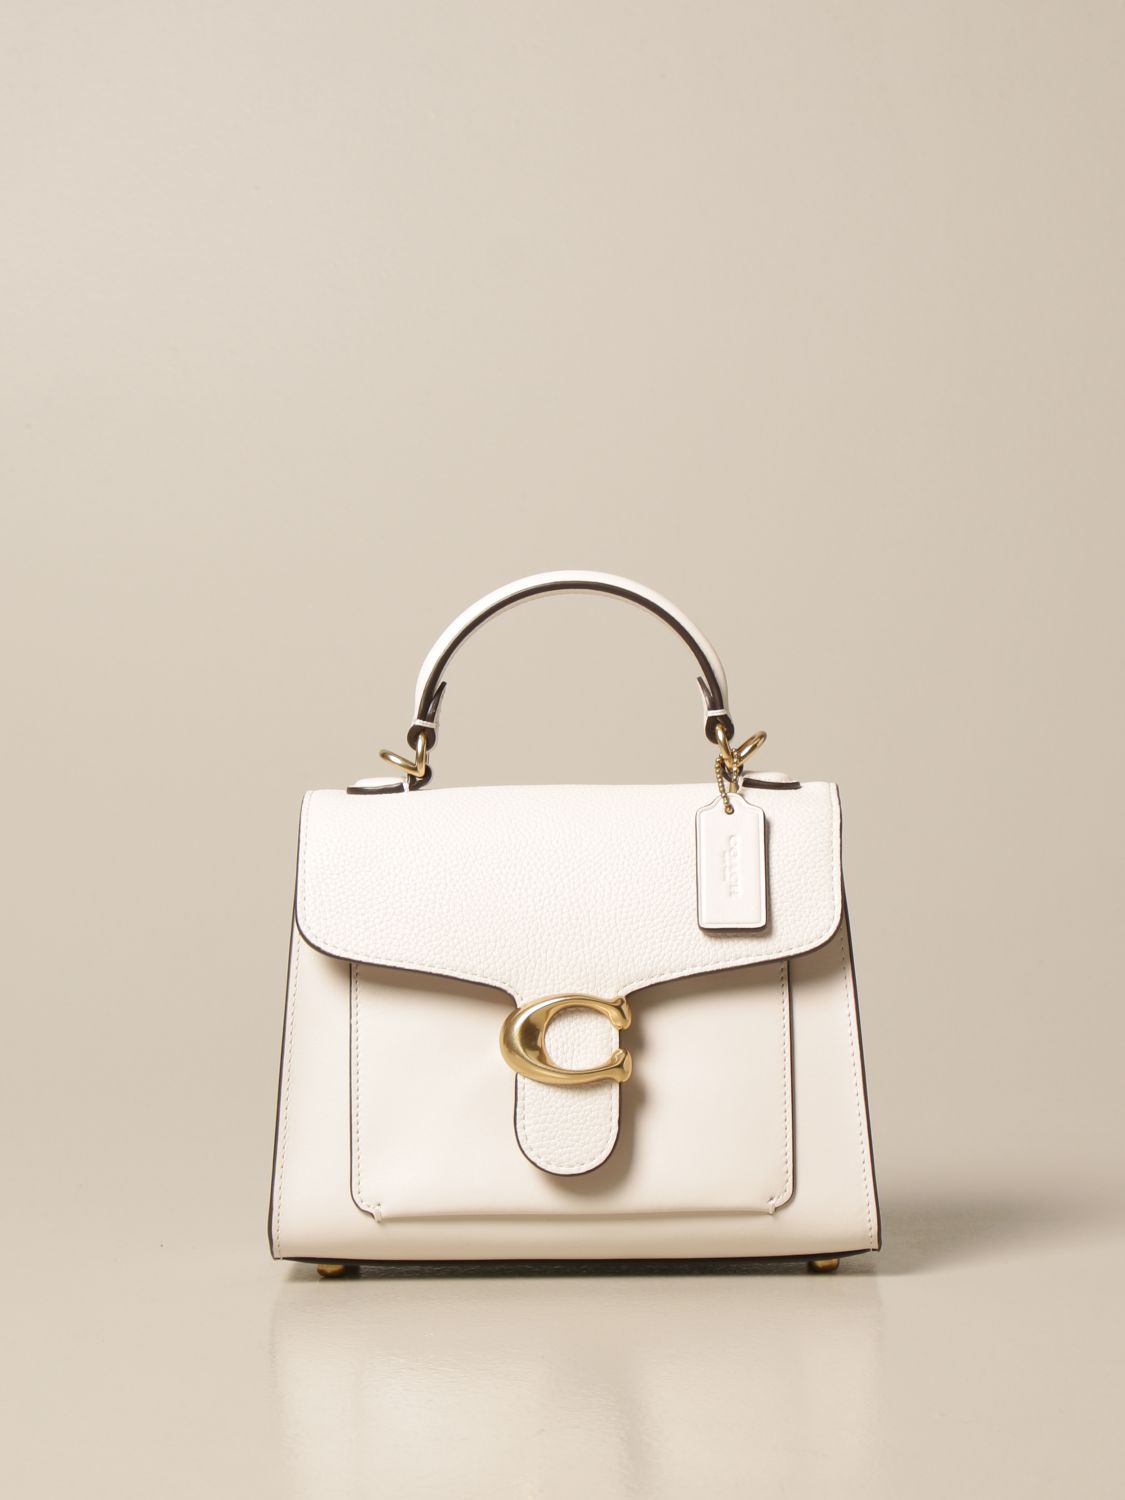 COACH: Tabby bag in smooth and textured leather - White | Coach handbag 636  online on 